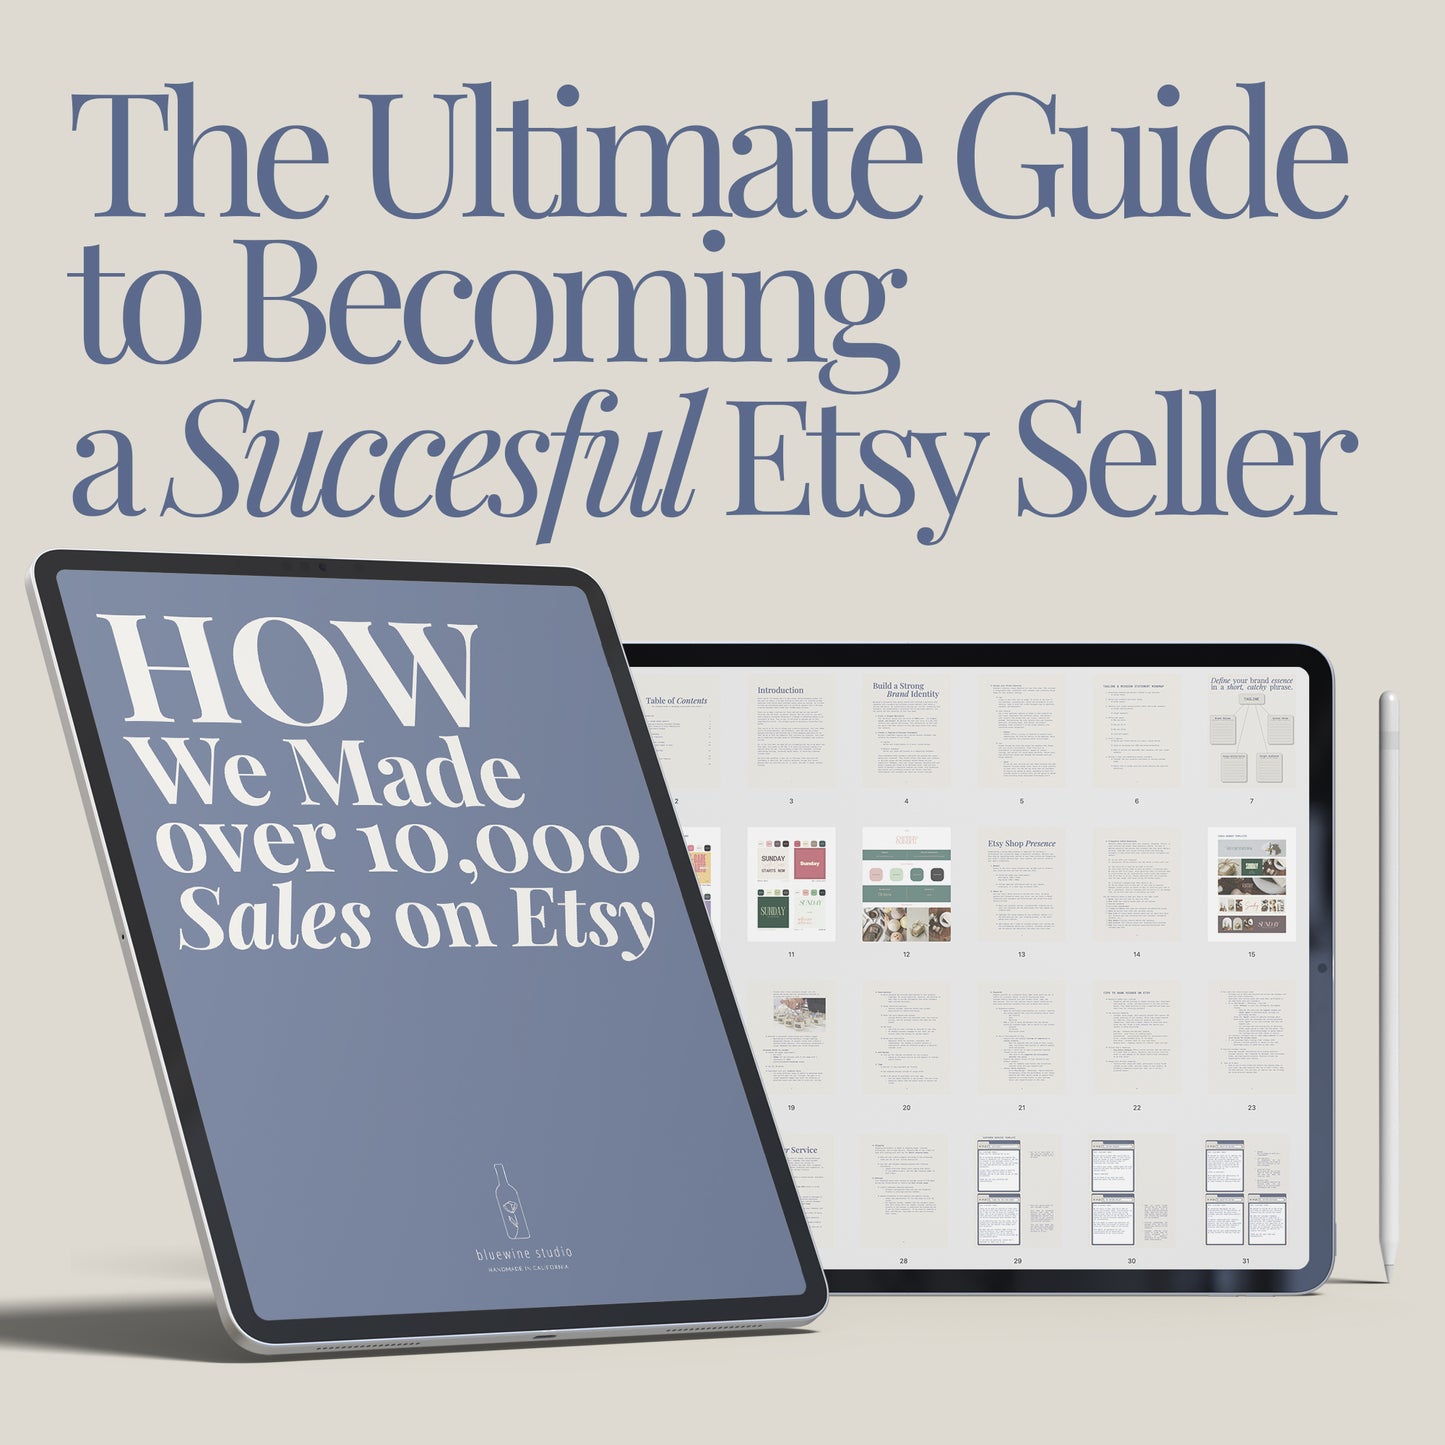 iPad screens displaying digital products from "How We Made Over 10,000 Sales on Etsy: The Ultimate Guide To Becoming a Successful Etsy Seller"